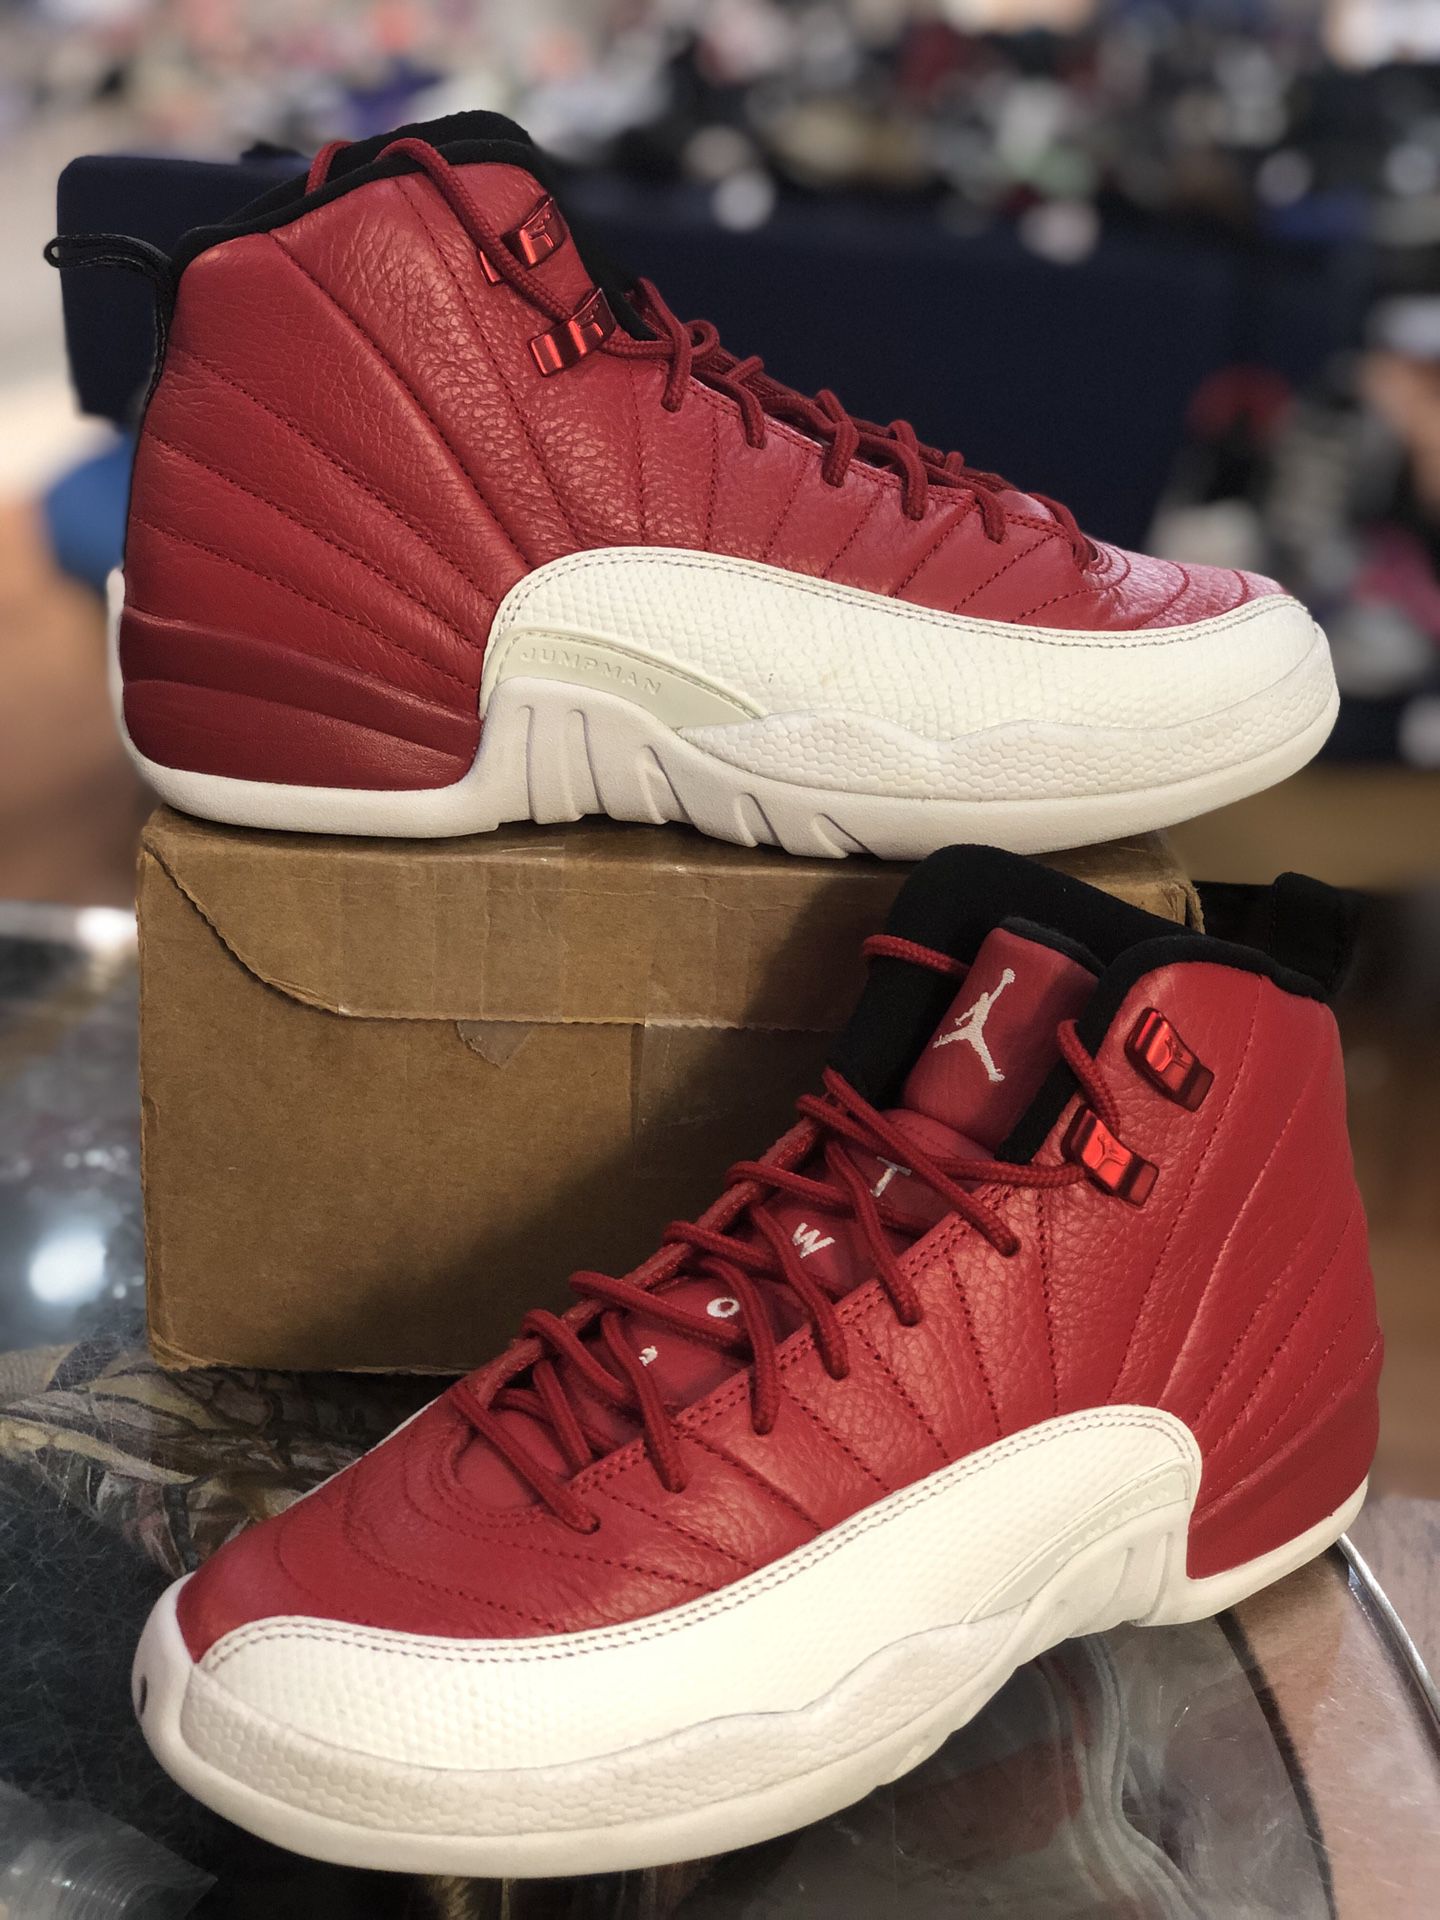 Gym red 12s size 7